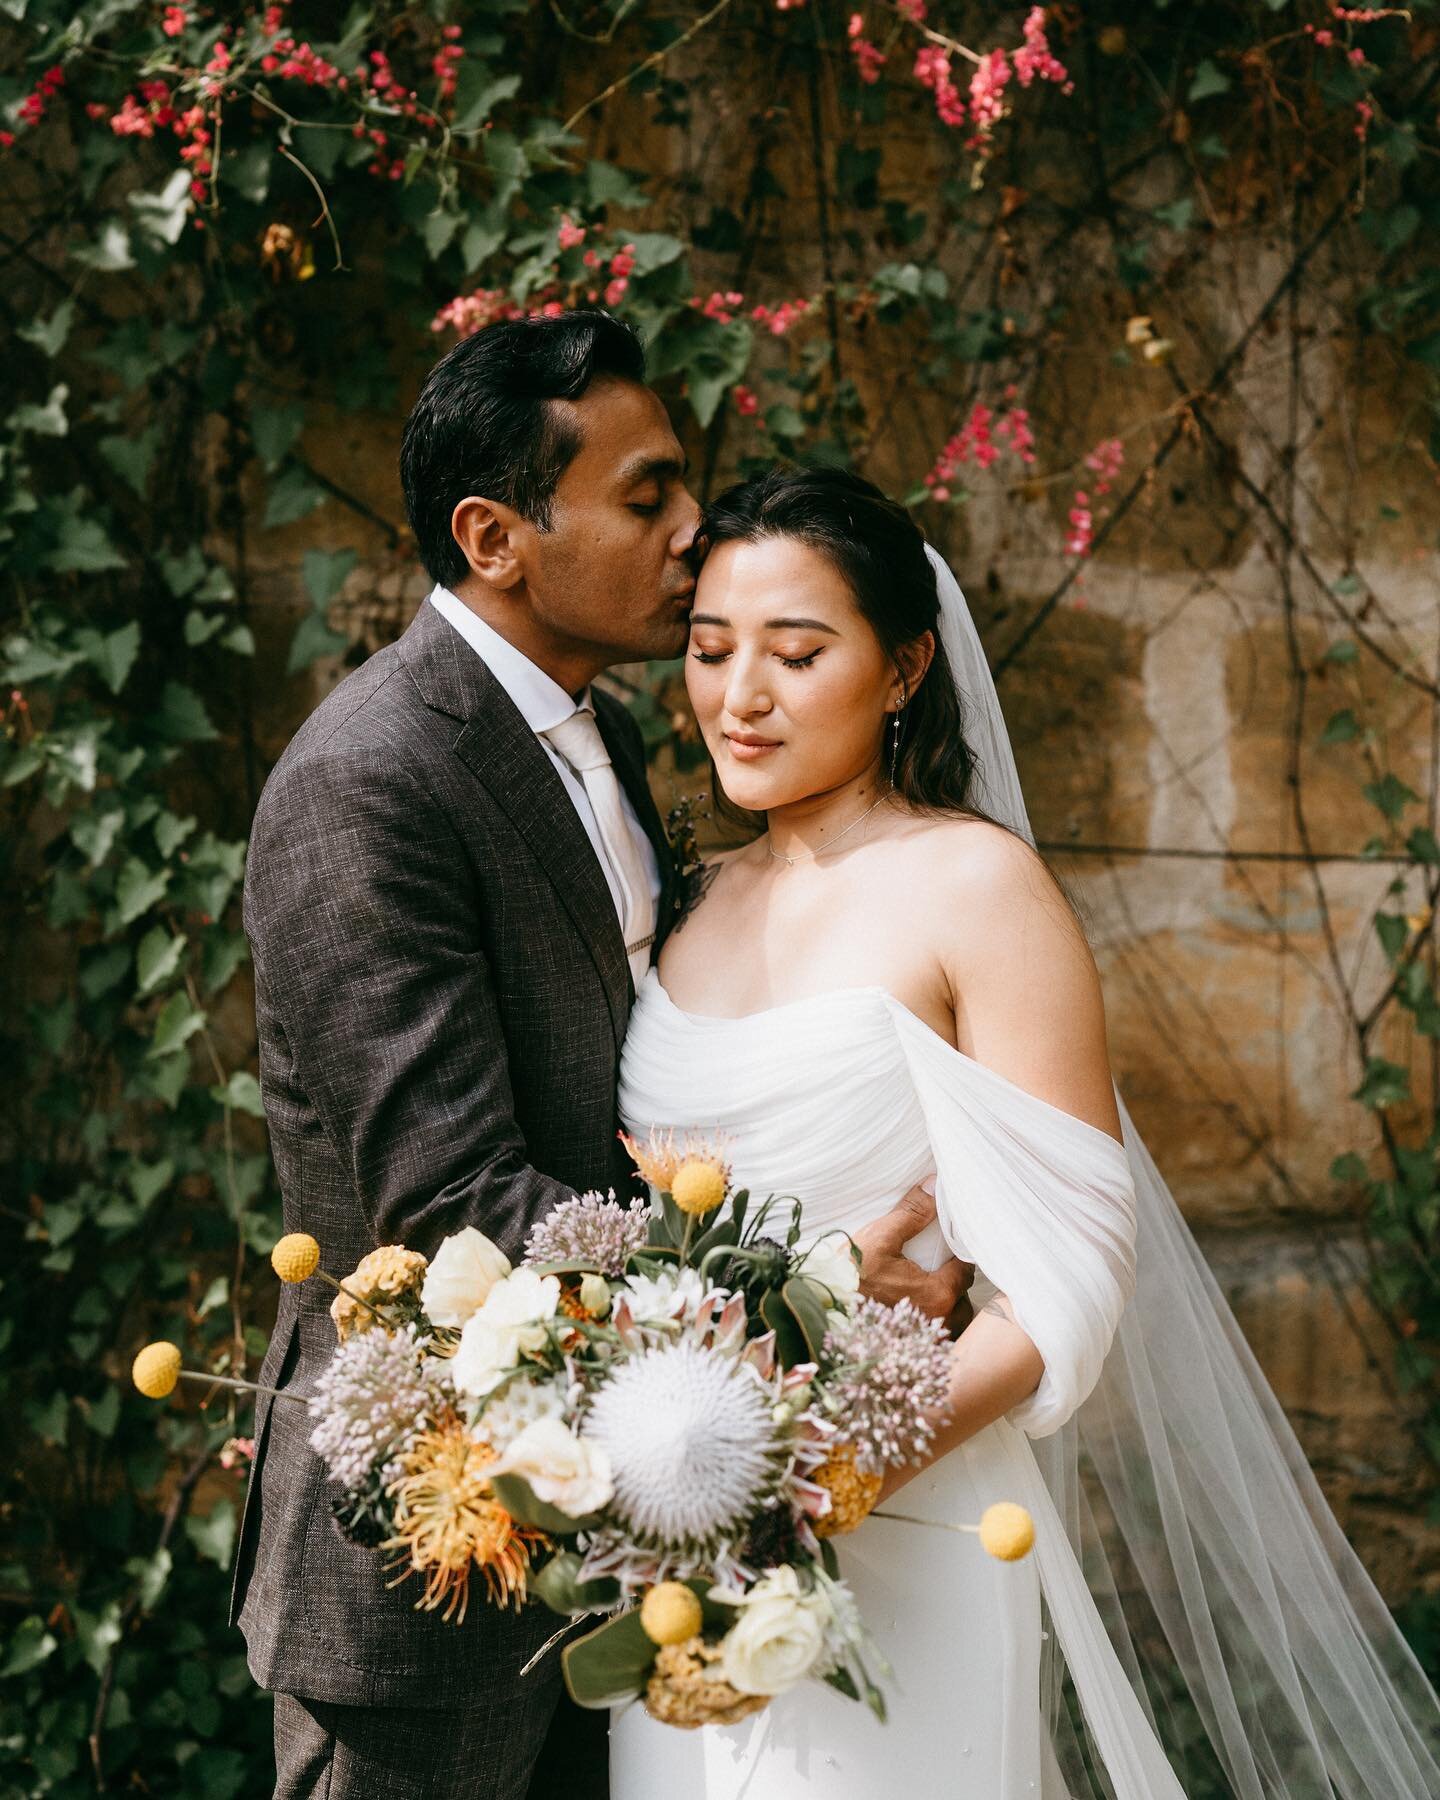 Profound bond can truly be hard to understand. As Hannah and Israel exchanged their heartfelt vows, friends and family stood by, finding themselves at a loss for words, their voices rendered silent by the raw beauty of the moment. In these moments, l